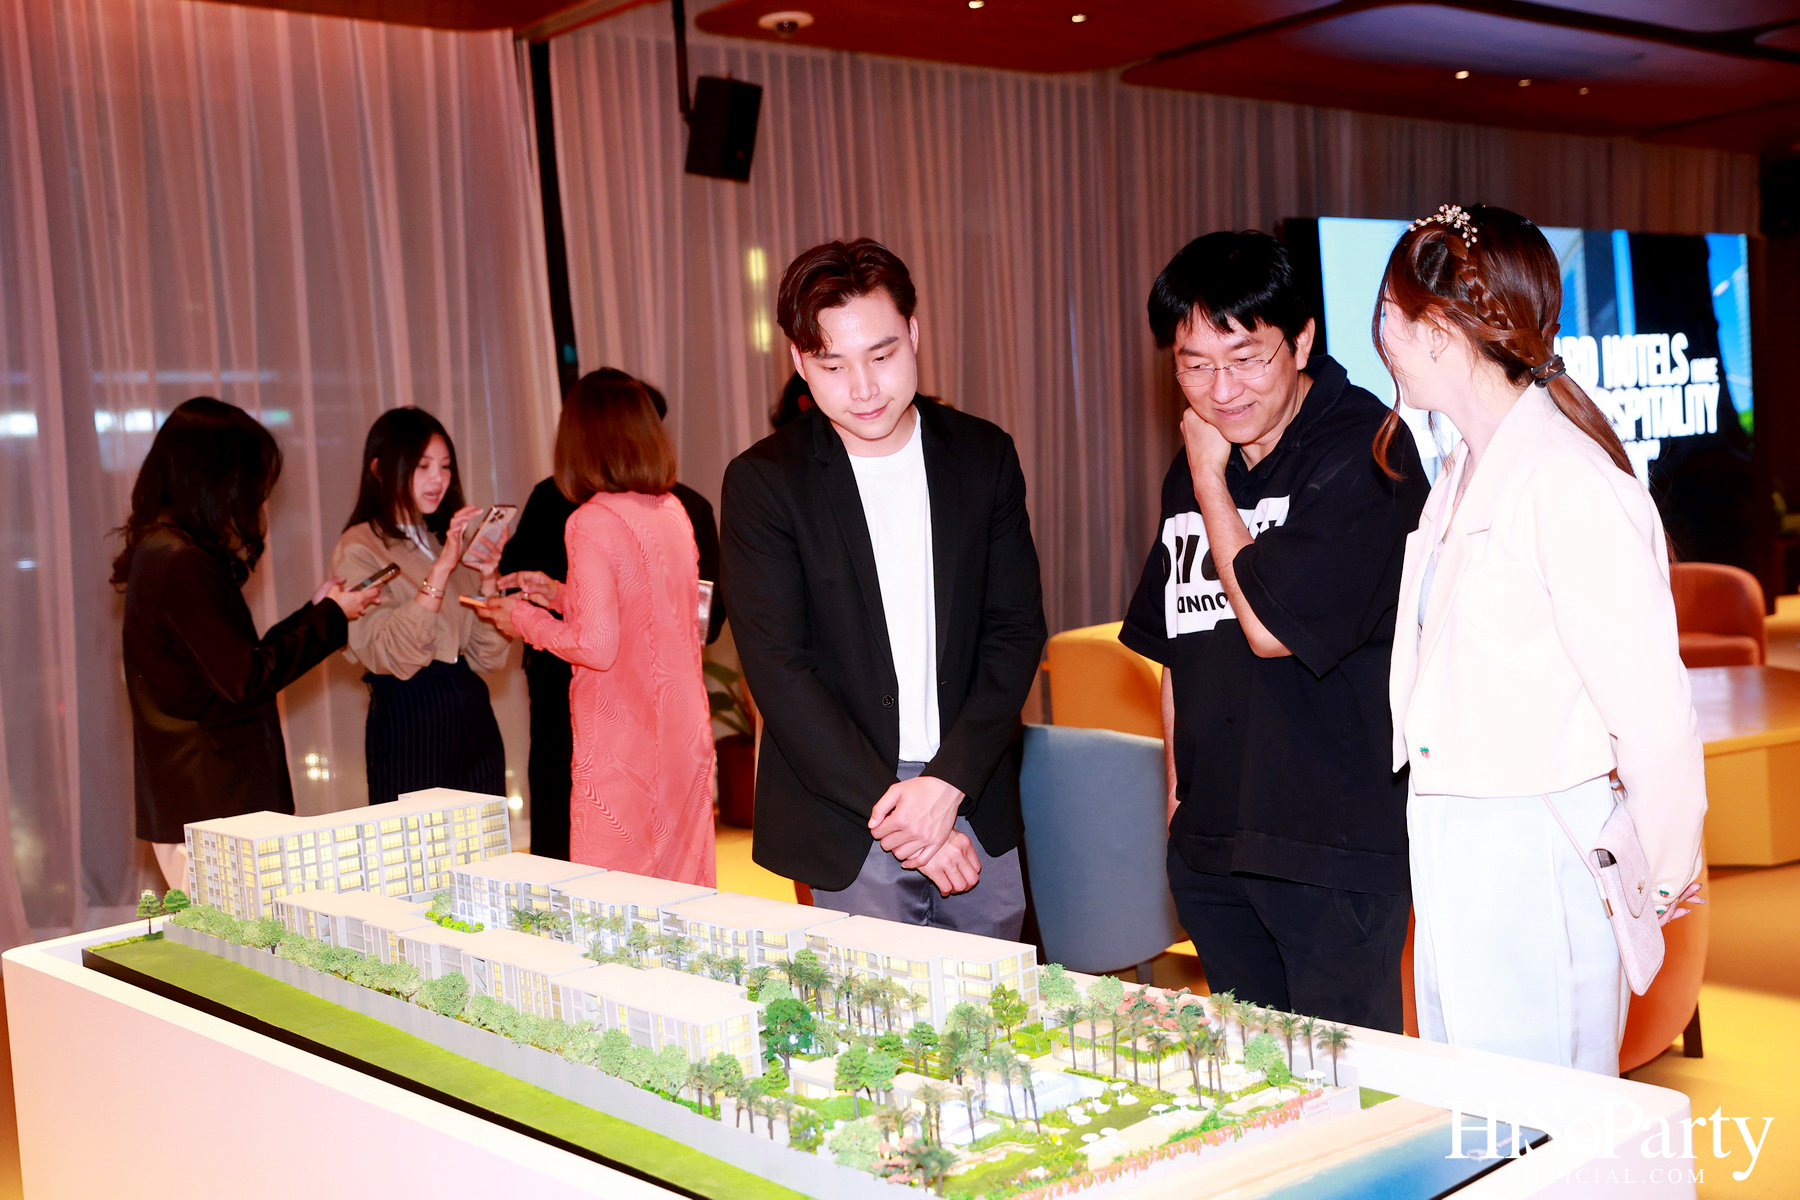 The Standard Residences Launch Party